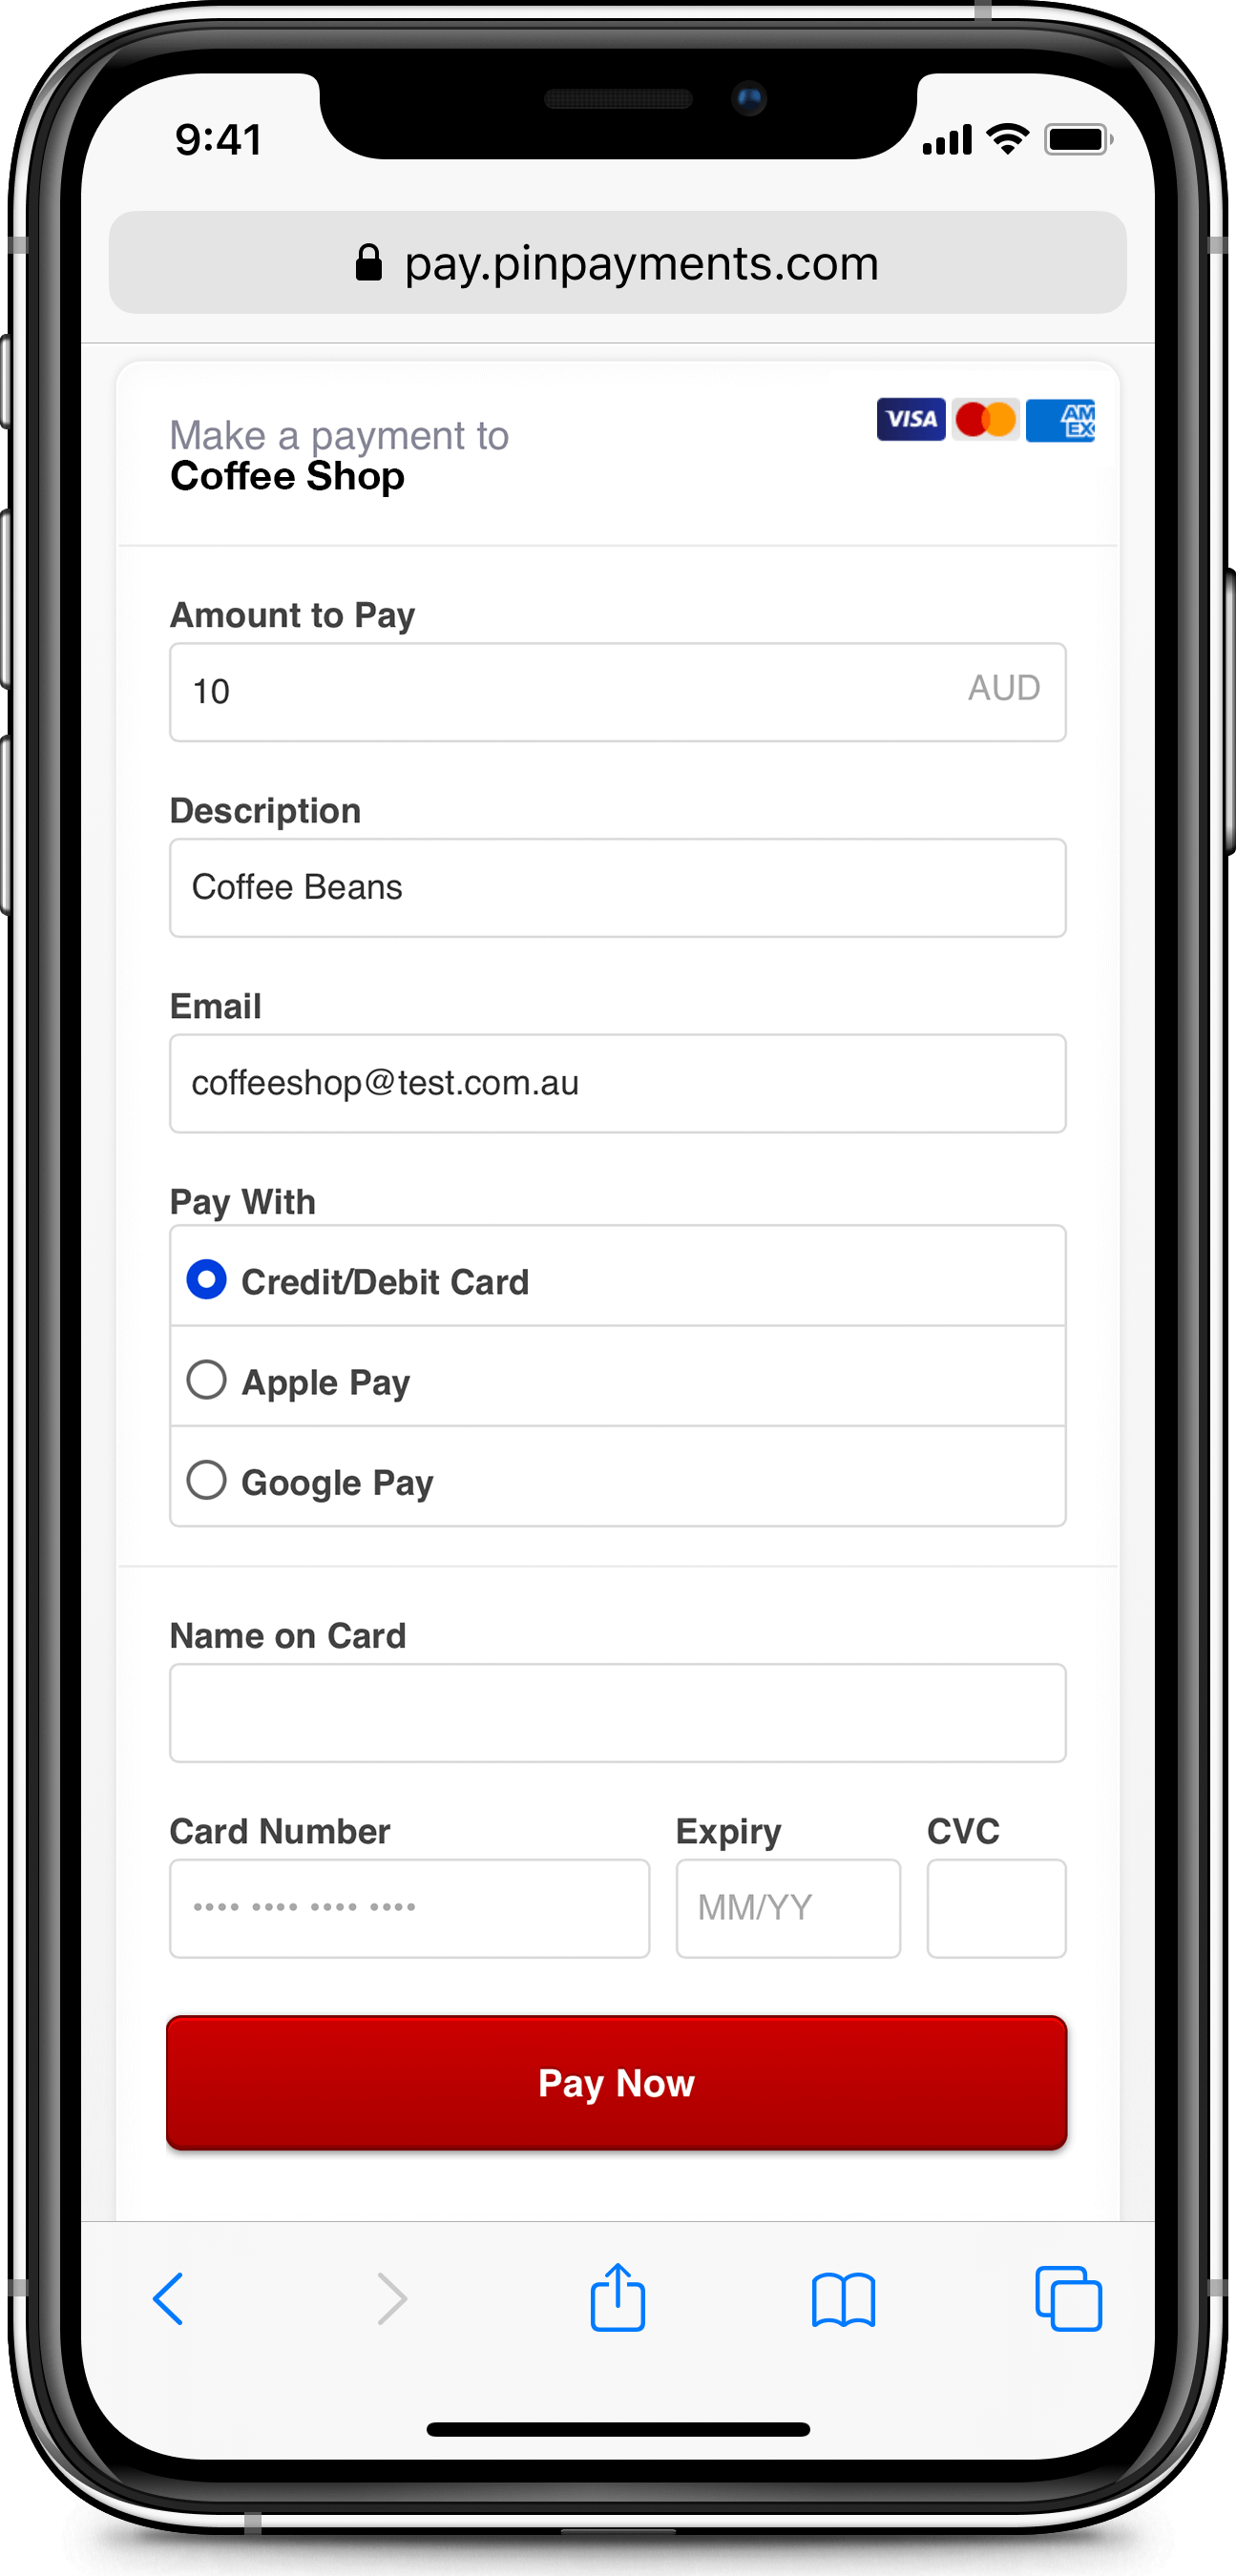 A user selects a Credit/ Debit Card as their payment option using Pin Payments' Payment Page